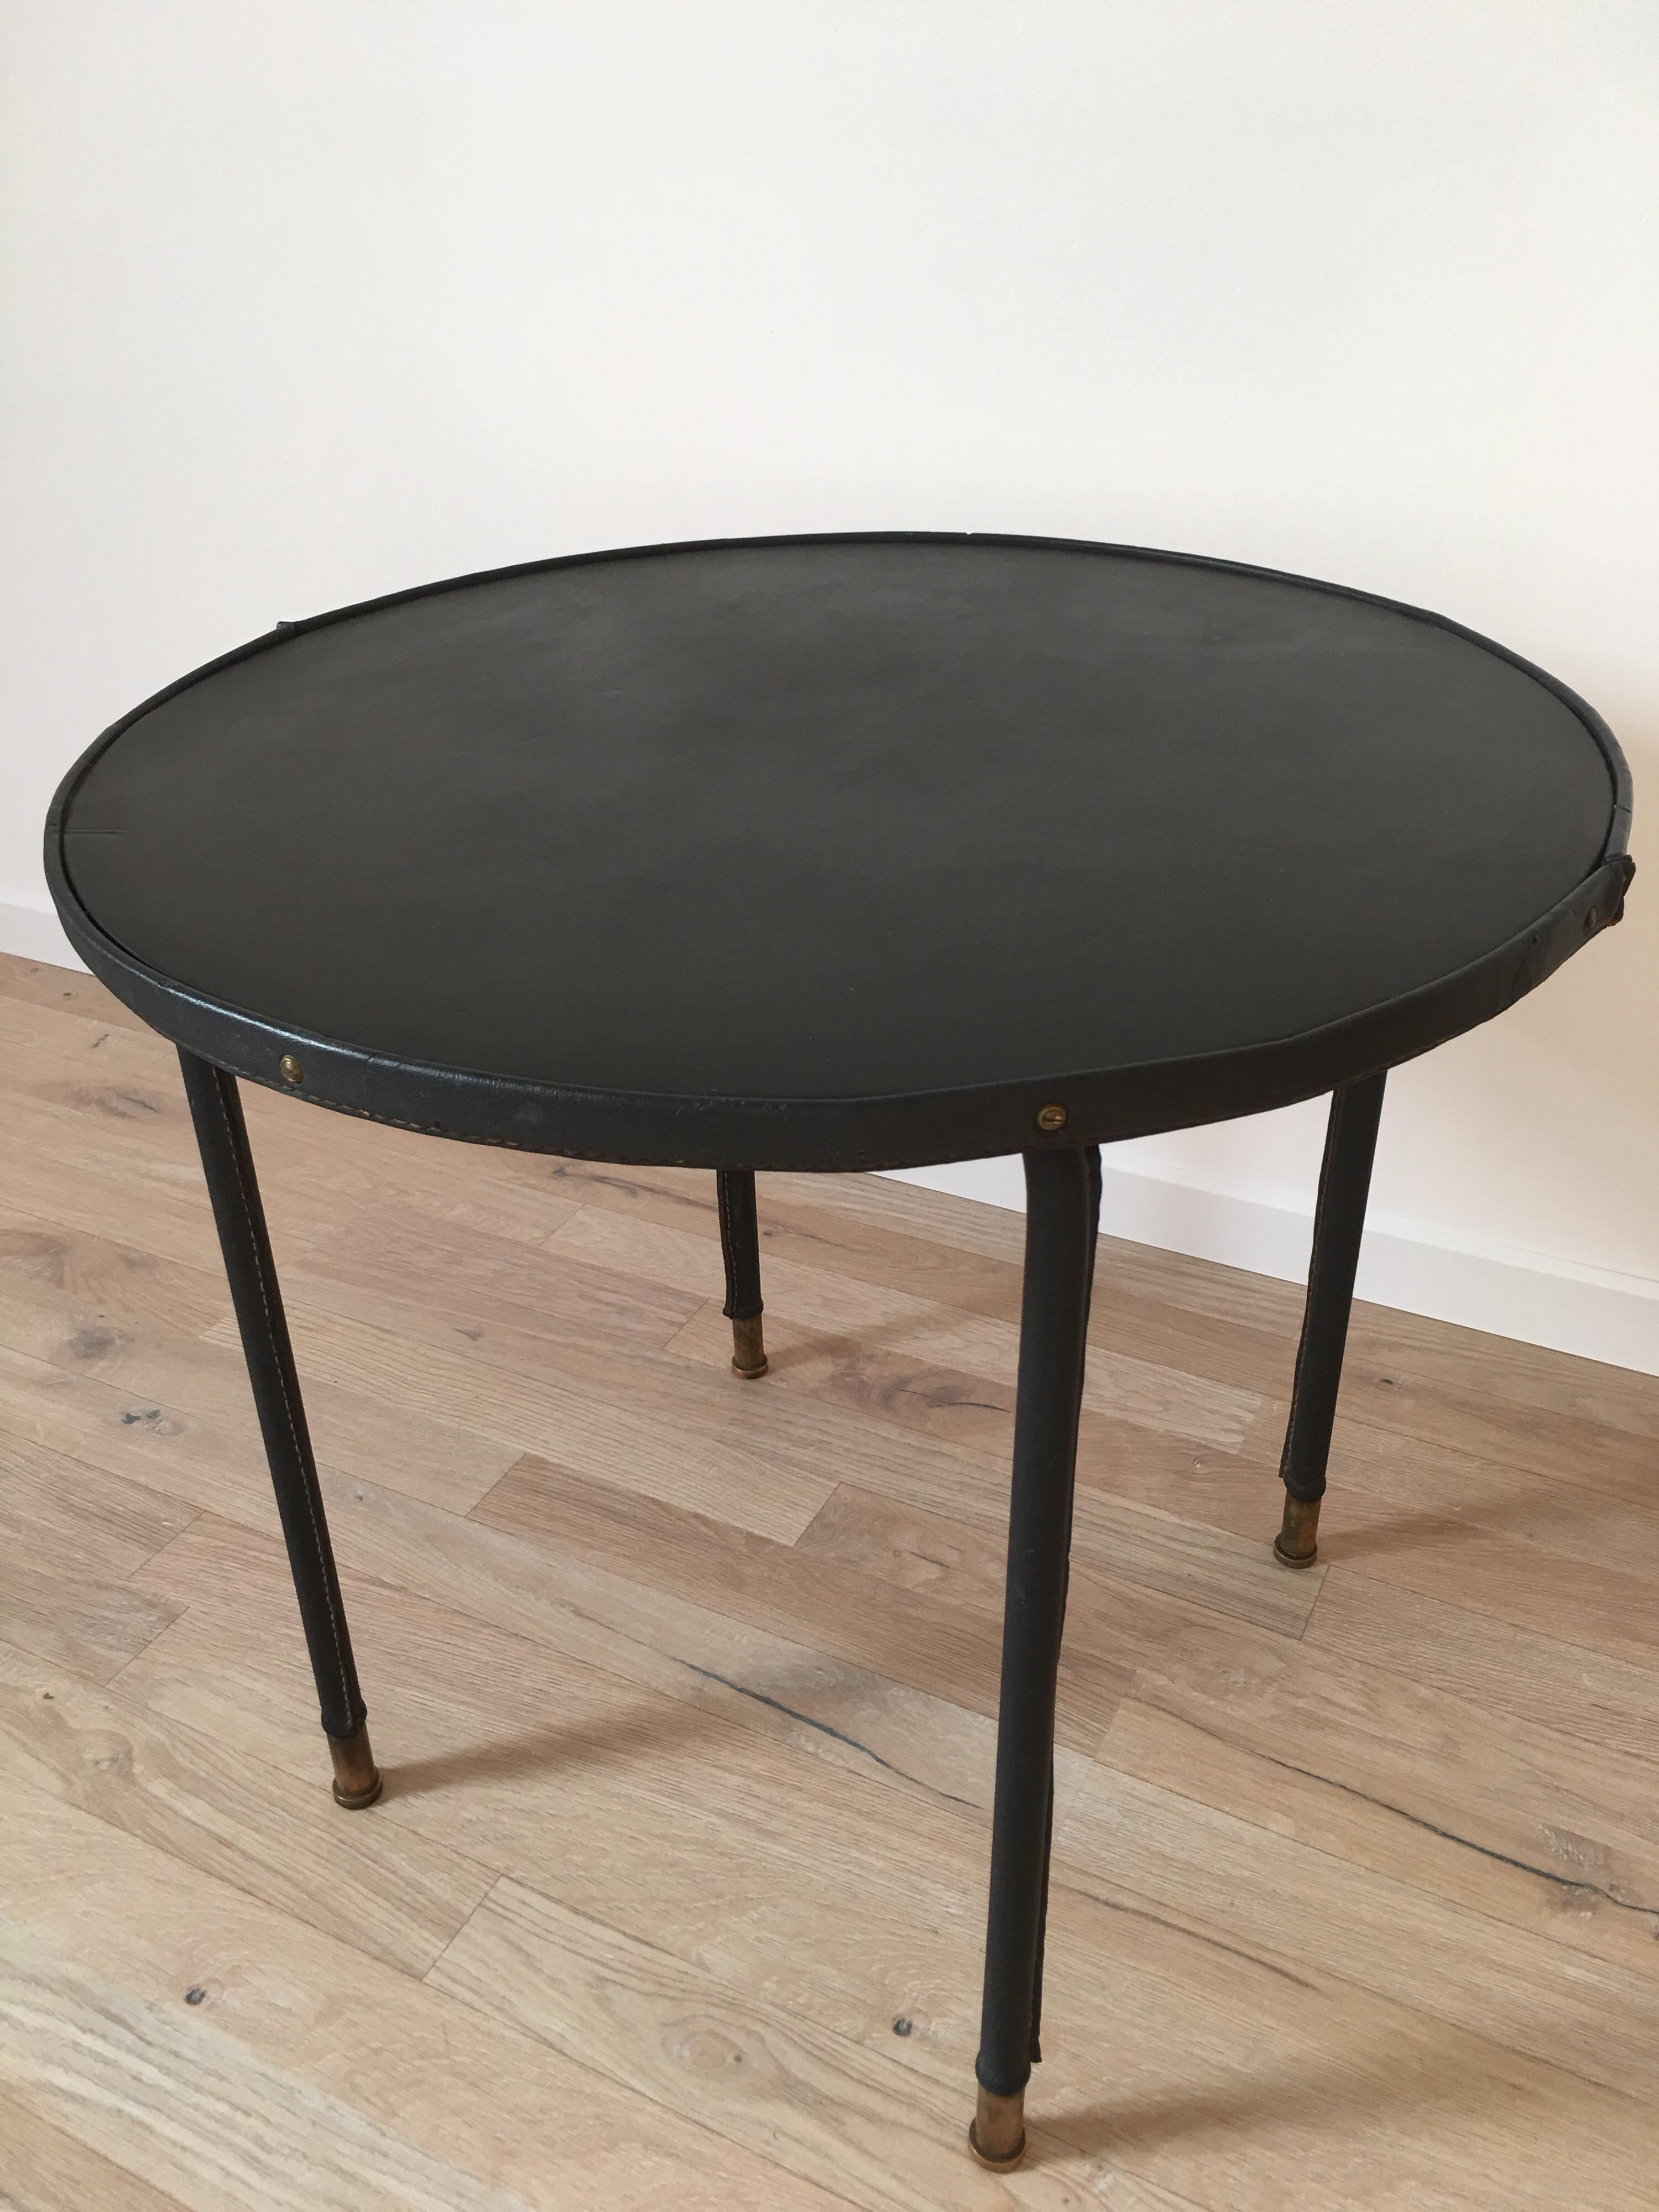 Jacques Adnet Style Black Stitched Leather Round Side Table, 1950s, French In Good Condition For Sale In Aix En Provence, FR